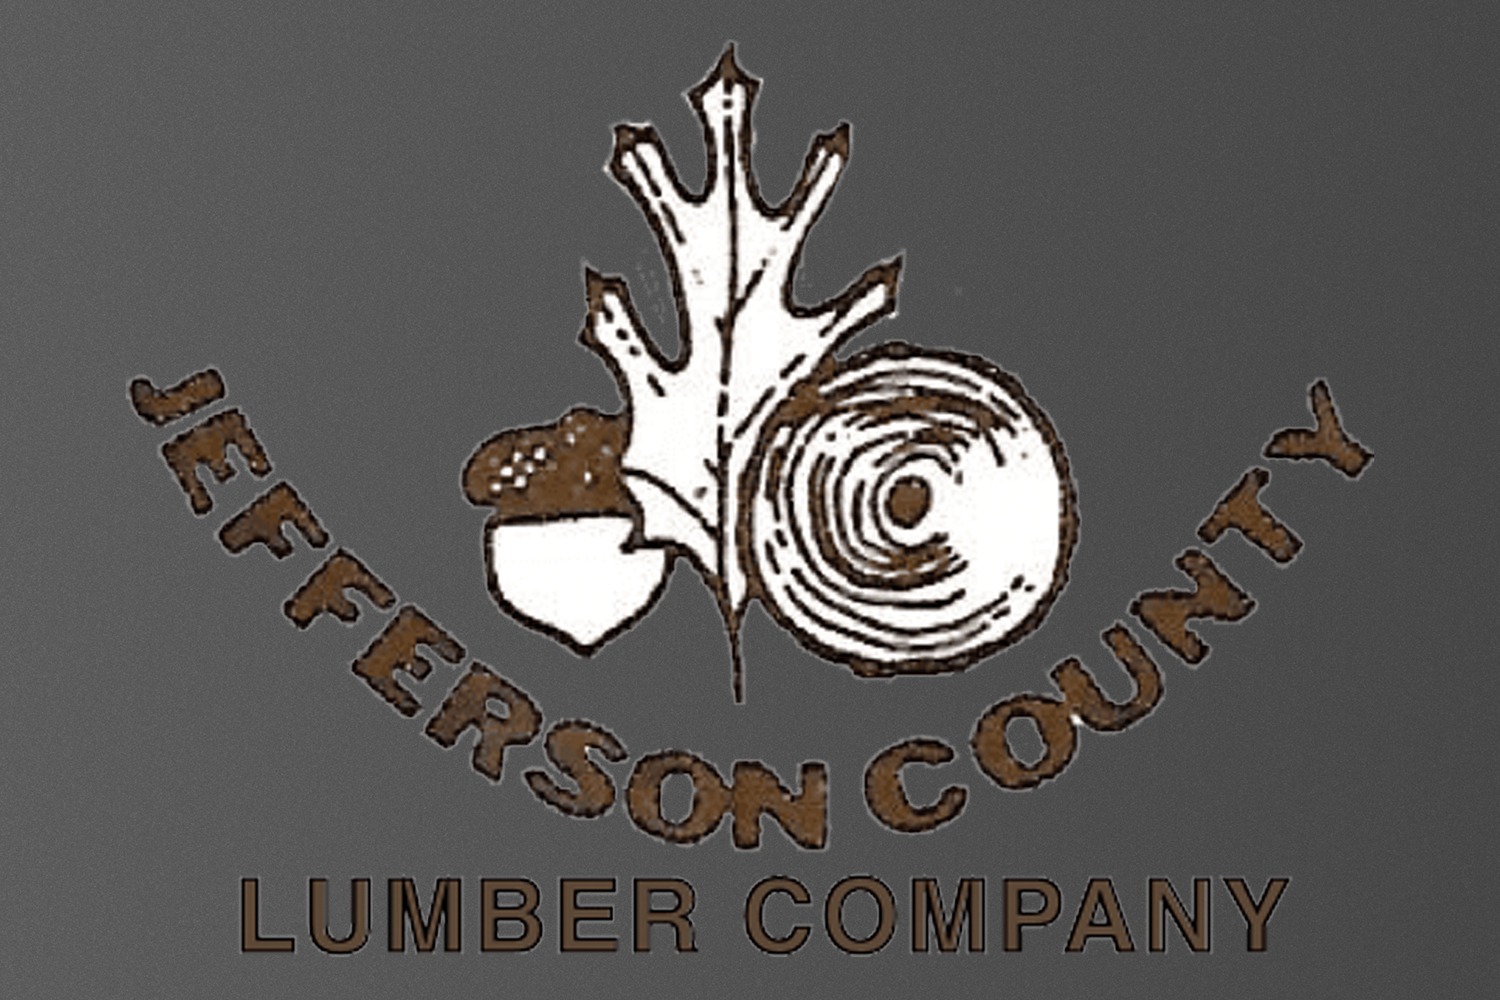 Read our comprehensive review of Jefferson County Lumber, a trusted lumber yard in Imperial, MO. Discover their commitment to quality products, exceptional service, and extensive range of construction supplies and building materials. Partner with Gott Marketing for all your lumber yard and marketing needs.